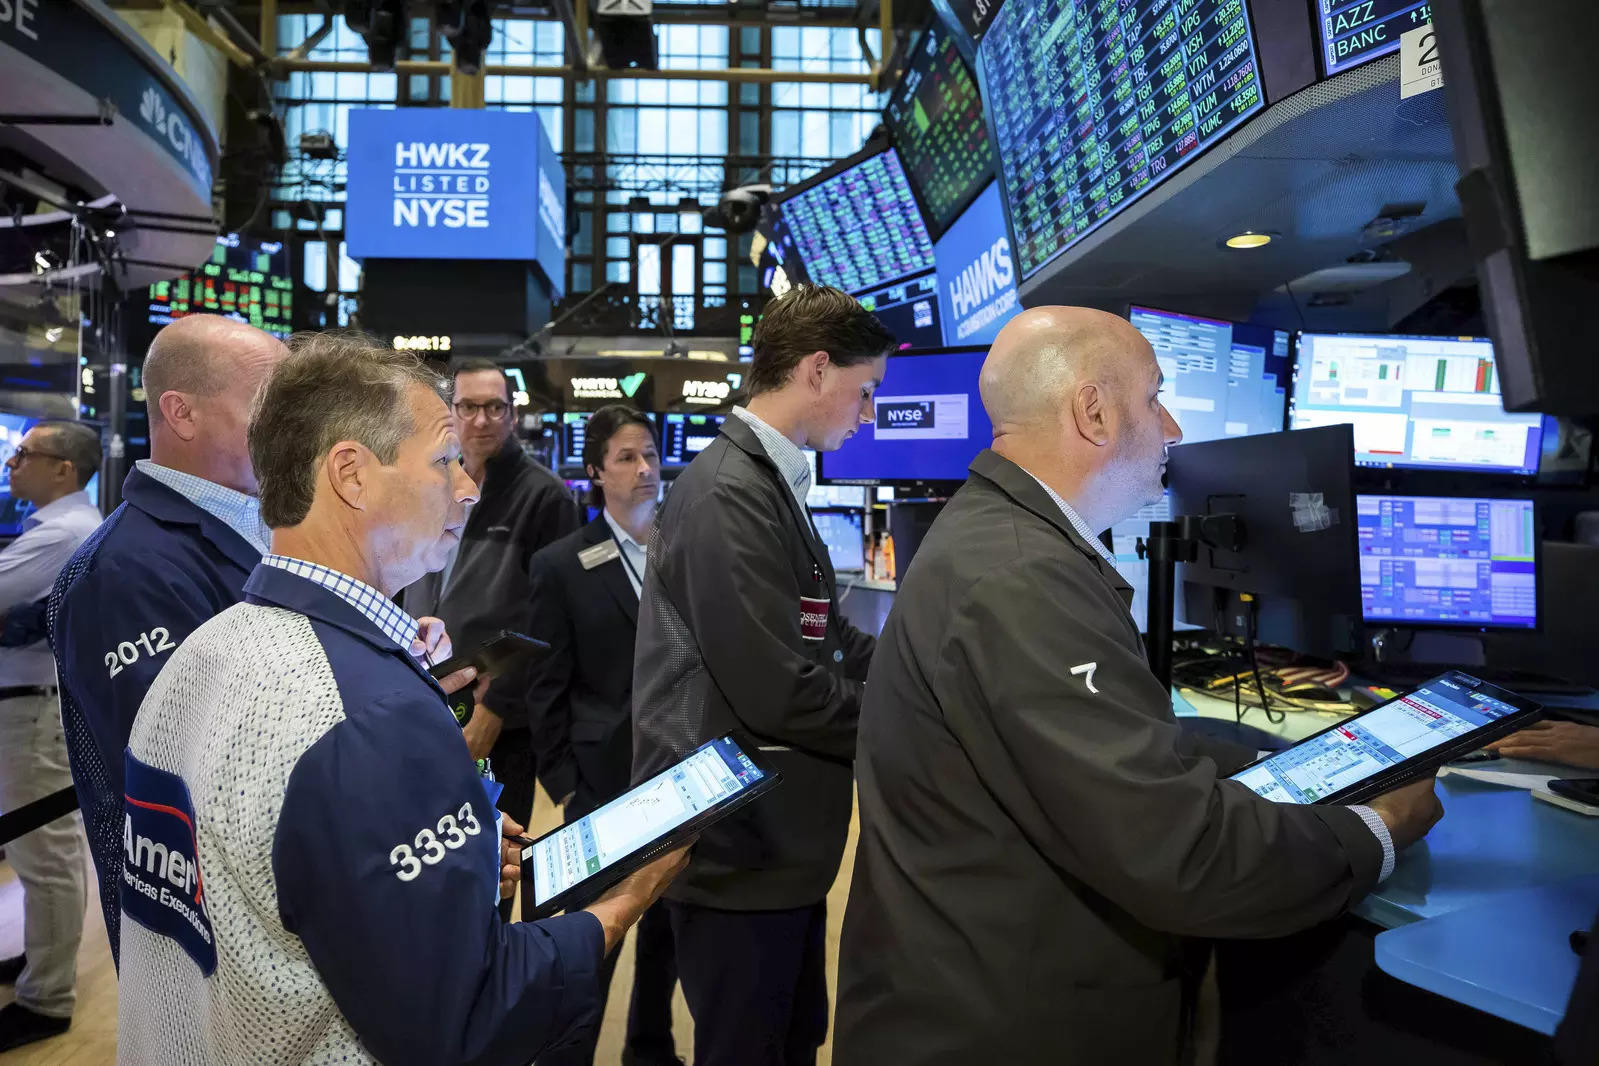 Wall St Week Ahead: Stock rally fanned by hopes of Fed 'past peak hawkishness'